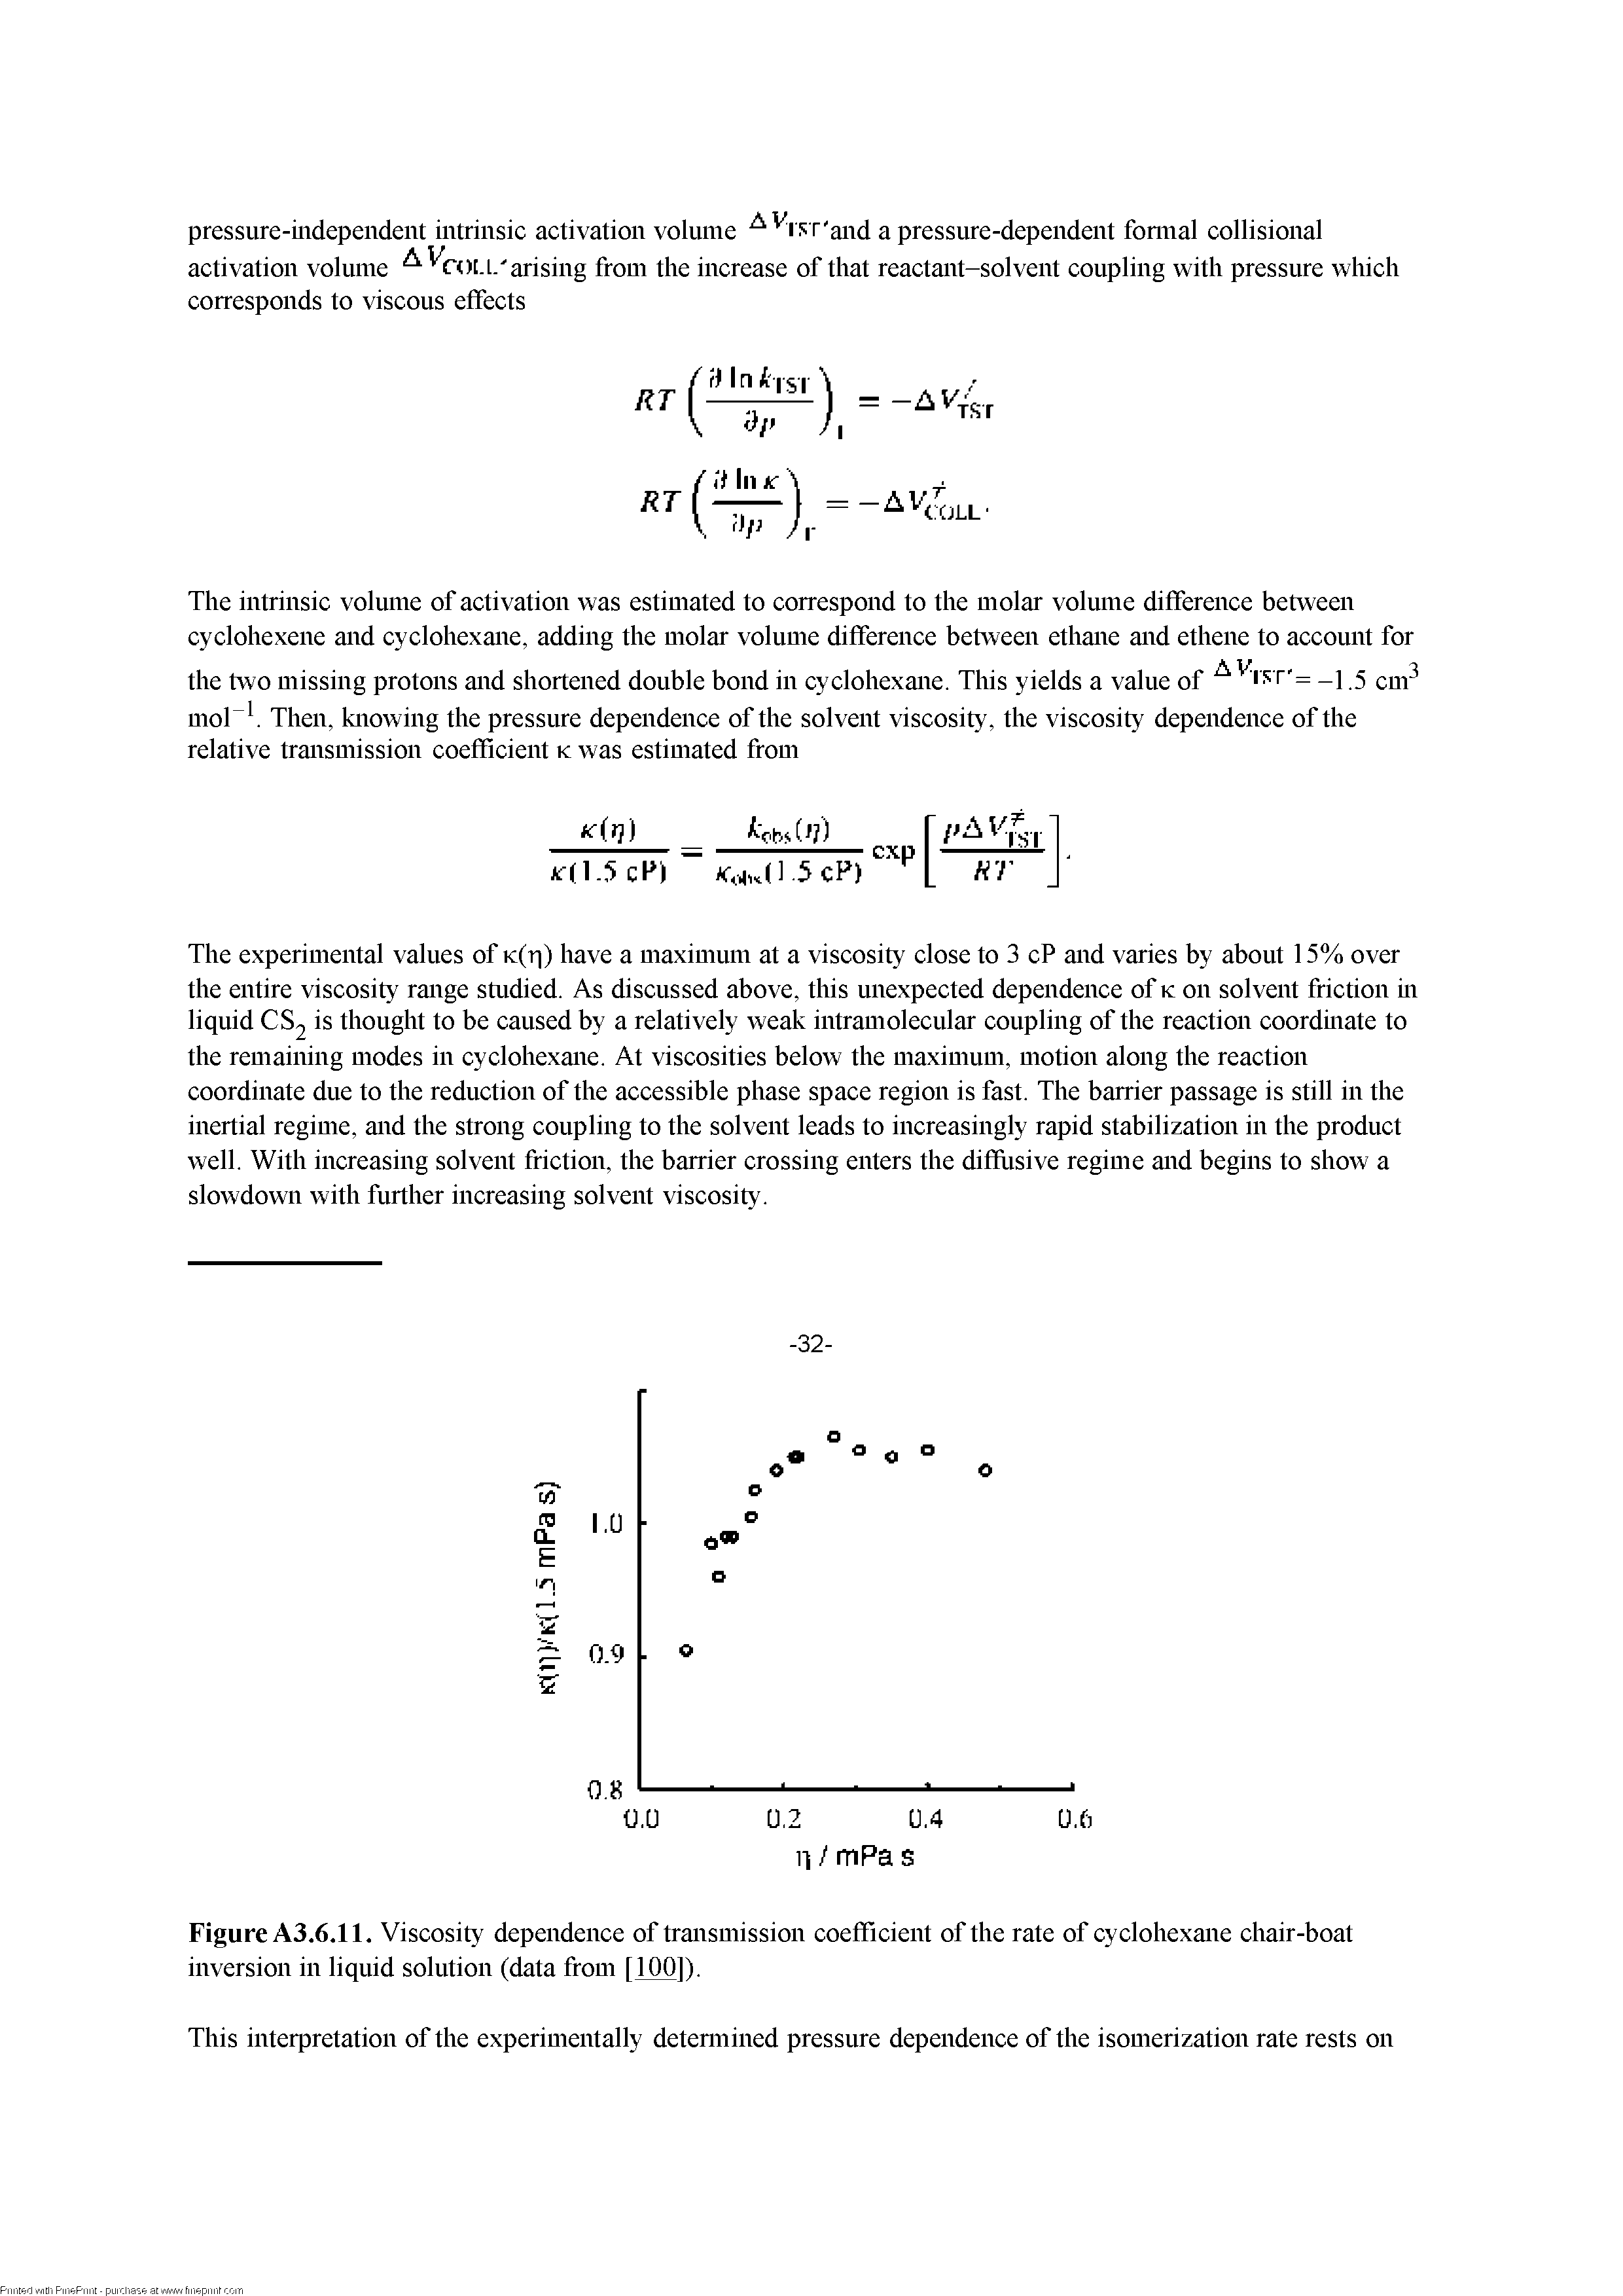 Figure A3.6.11. Viscosity dependence of transmission coefficient of the rate of cyclohexane chair-boat inversion in liquid solution (data from [100]).